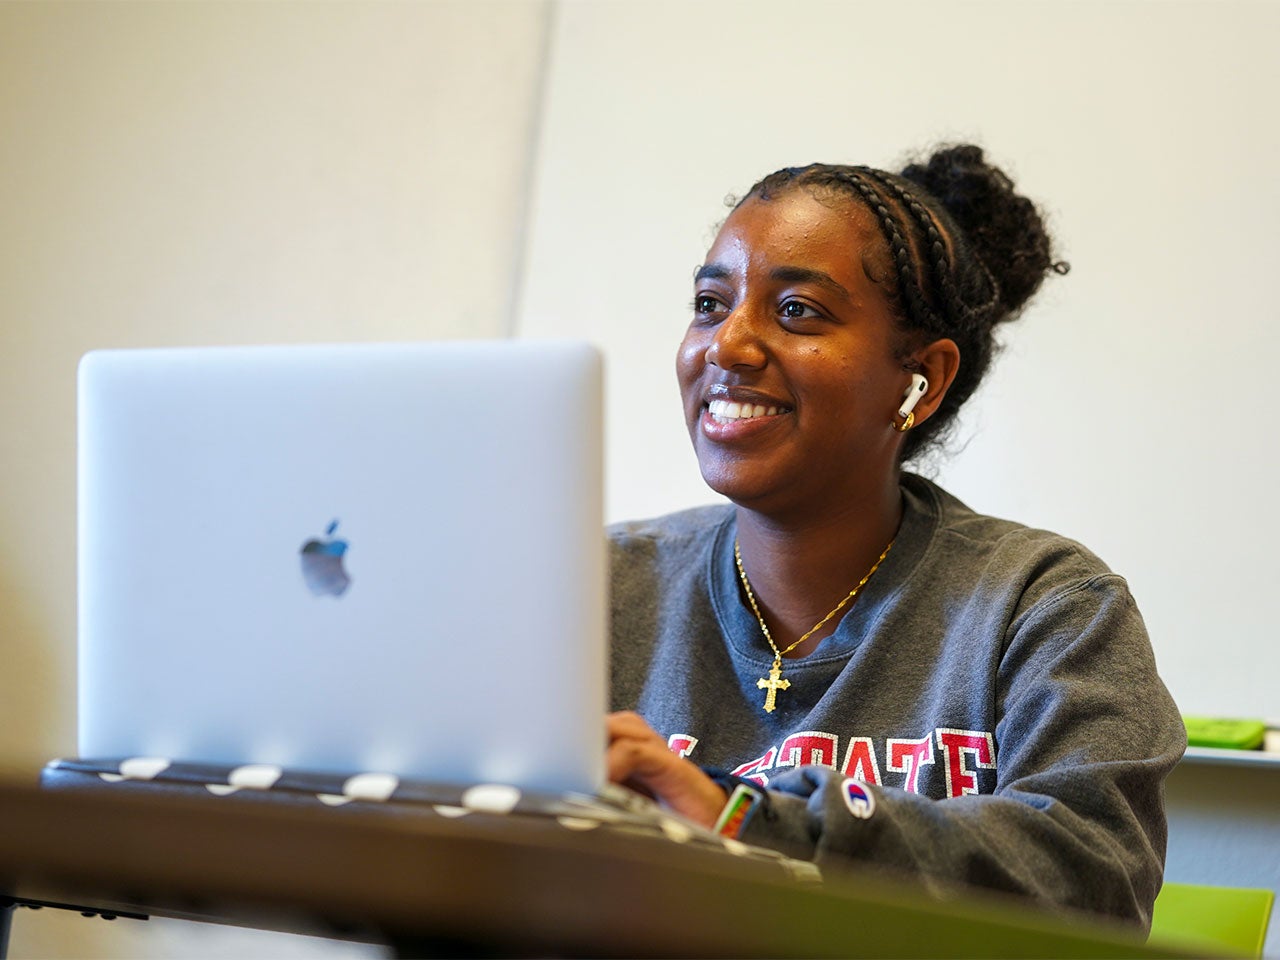 A UC Davis student smiles while typing on a silver laptop.